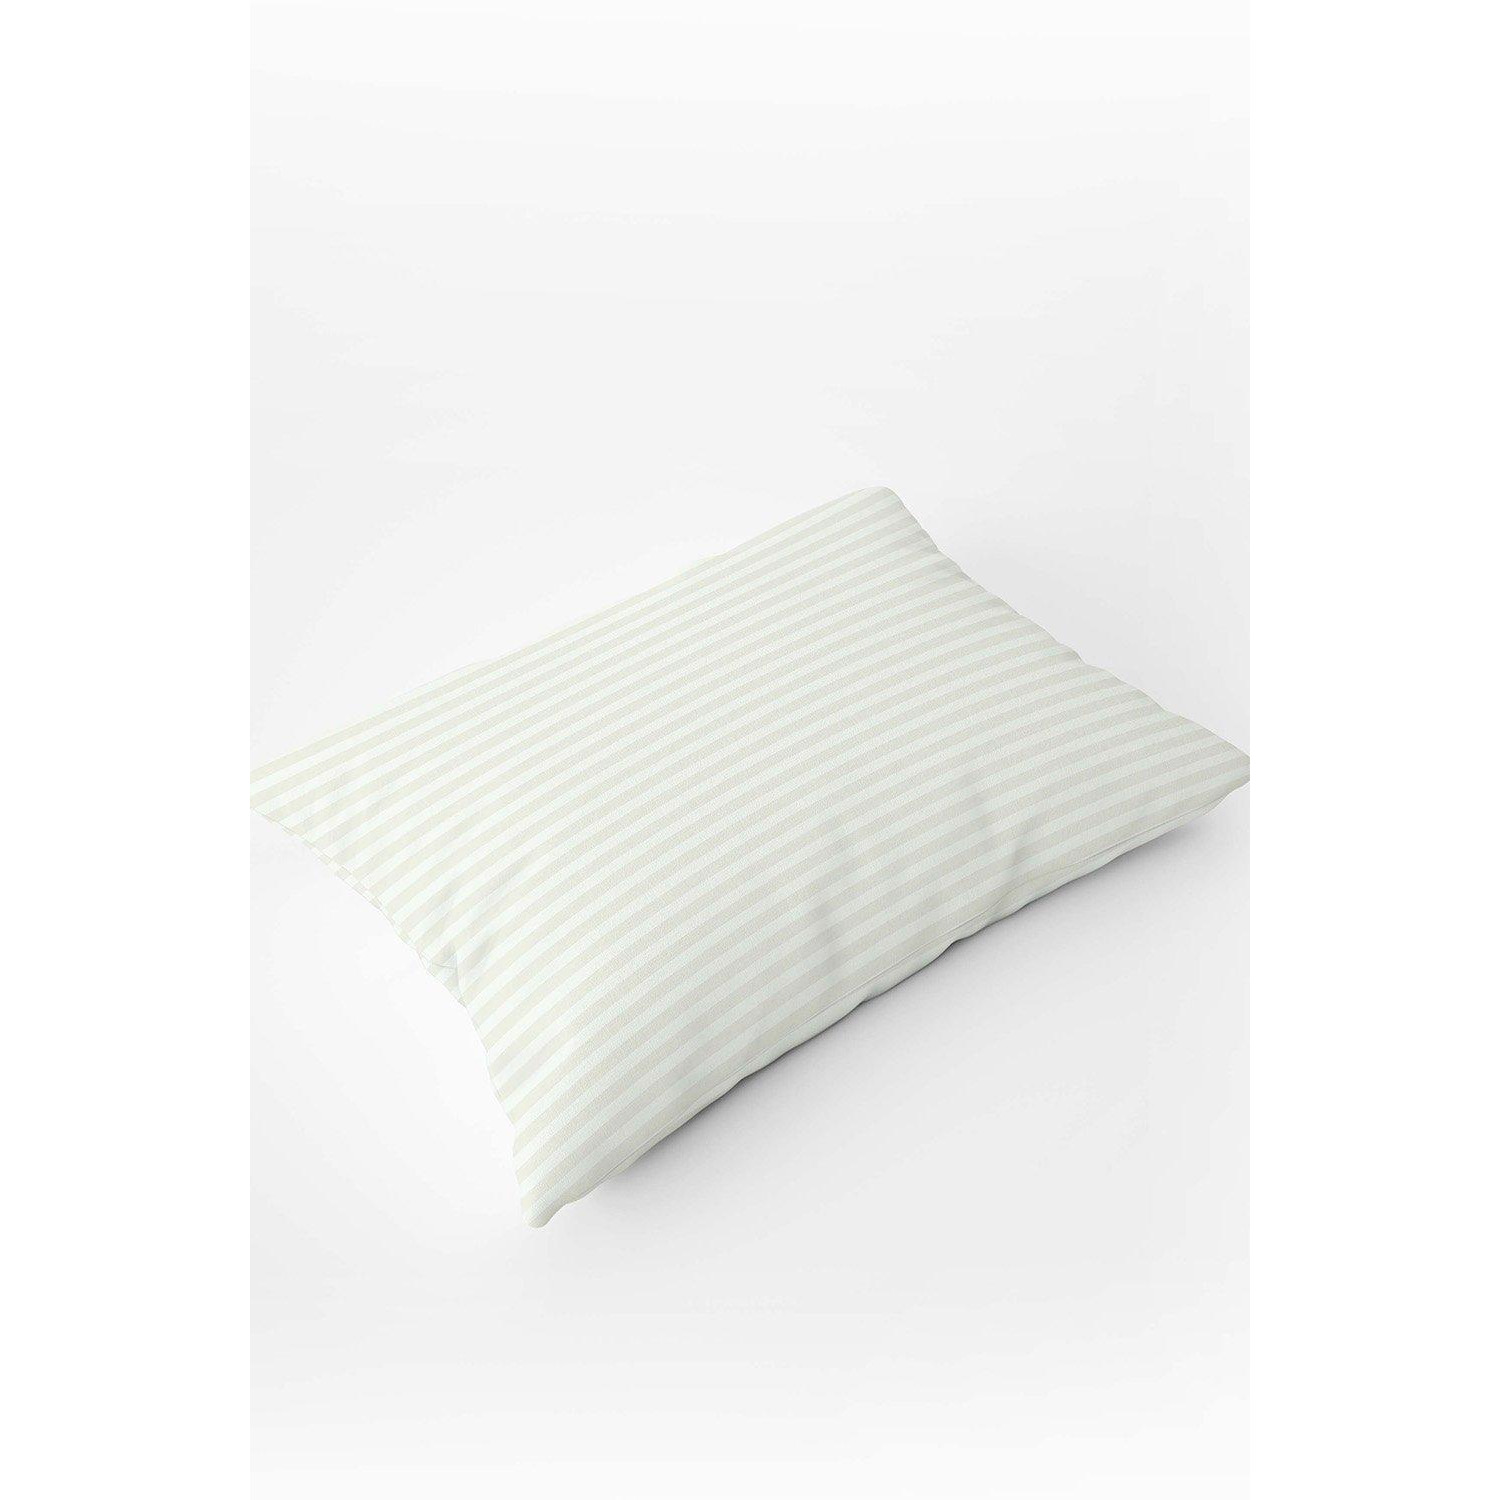 Hotel Suite Satin Stripe 540 Thread Count Housewife Pillowcase - image 1